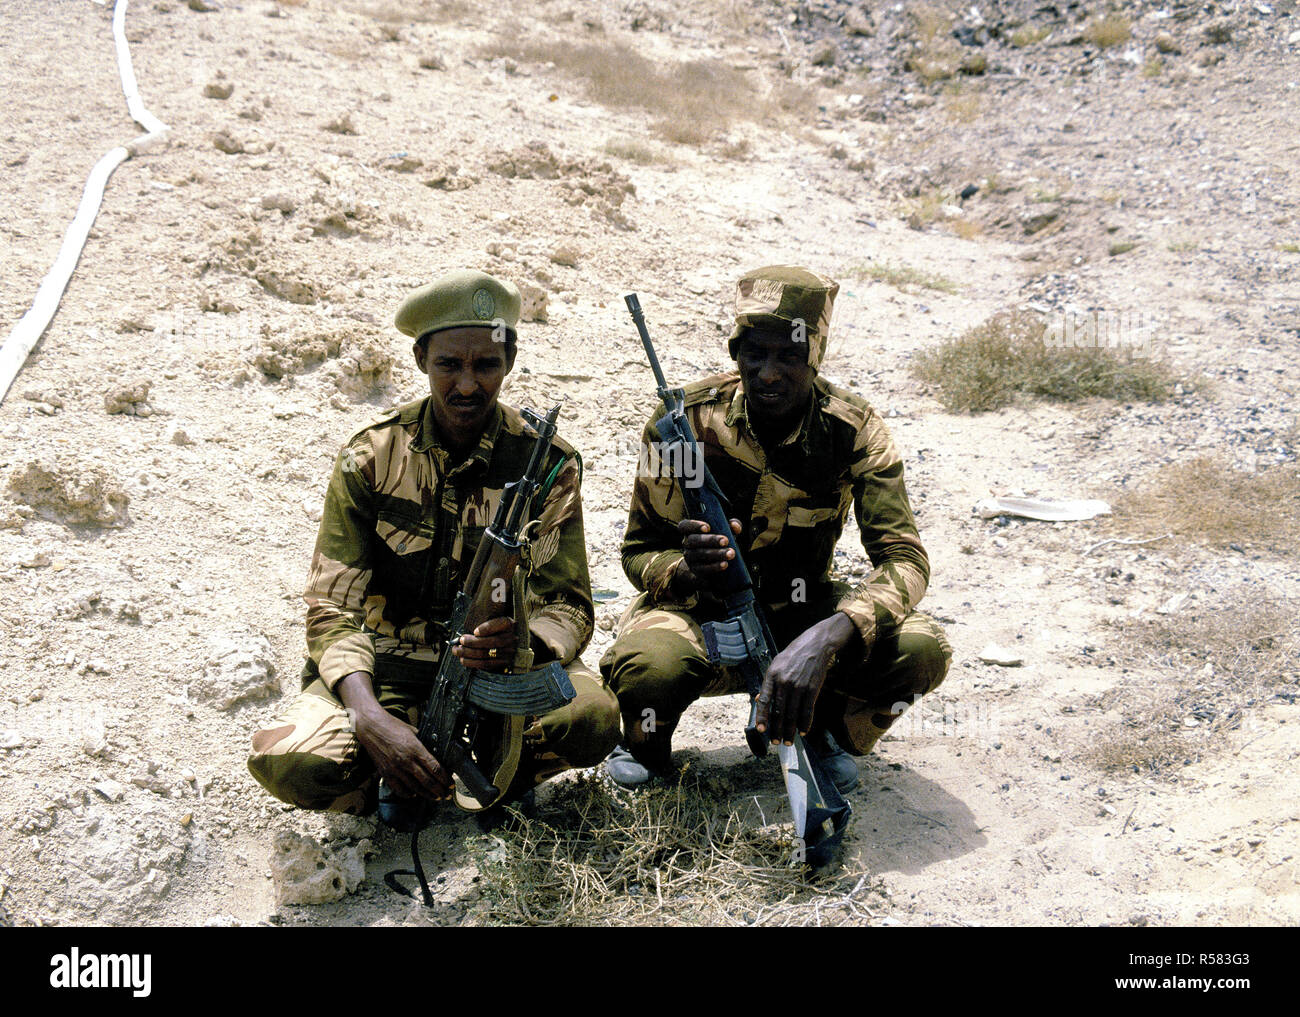 1993 - Two Somalian soldiers pose for a photo during Exercise EASTERN WIND '83, the amphibious landing phase of Exercise BRIGHT STAR '83.  The soldier on the right has an M16A1 rifle he borrowed from a US Marine, and the soldier on the left has an AKM 7.62 mm assault rifle. Stock Photo